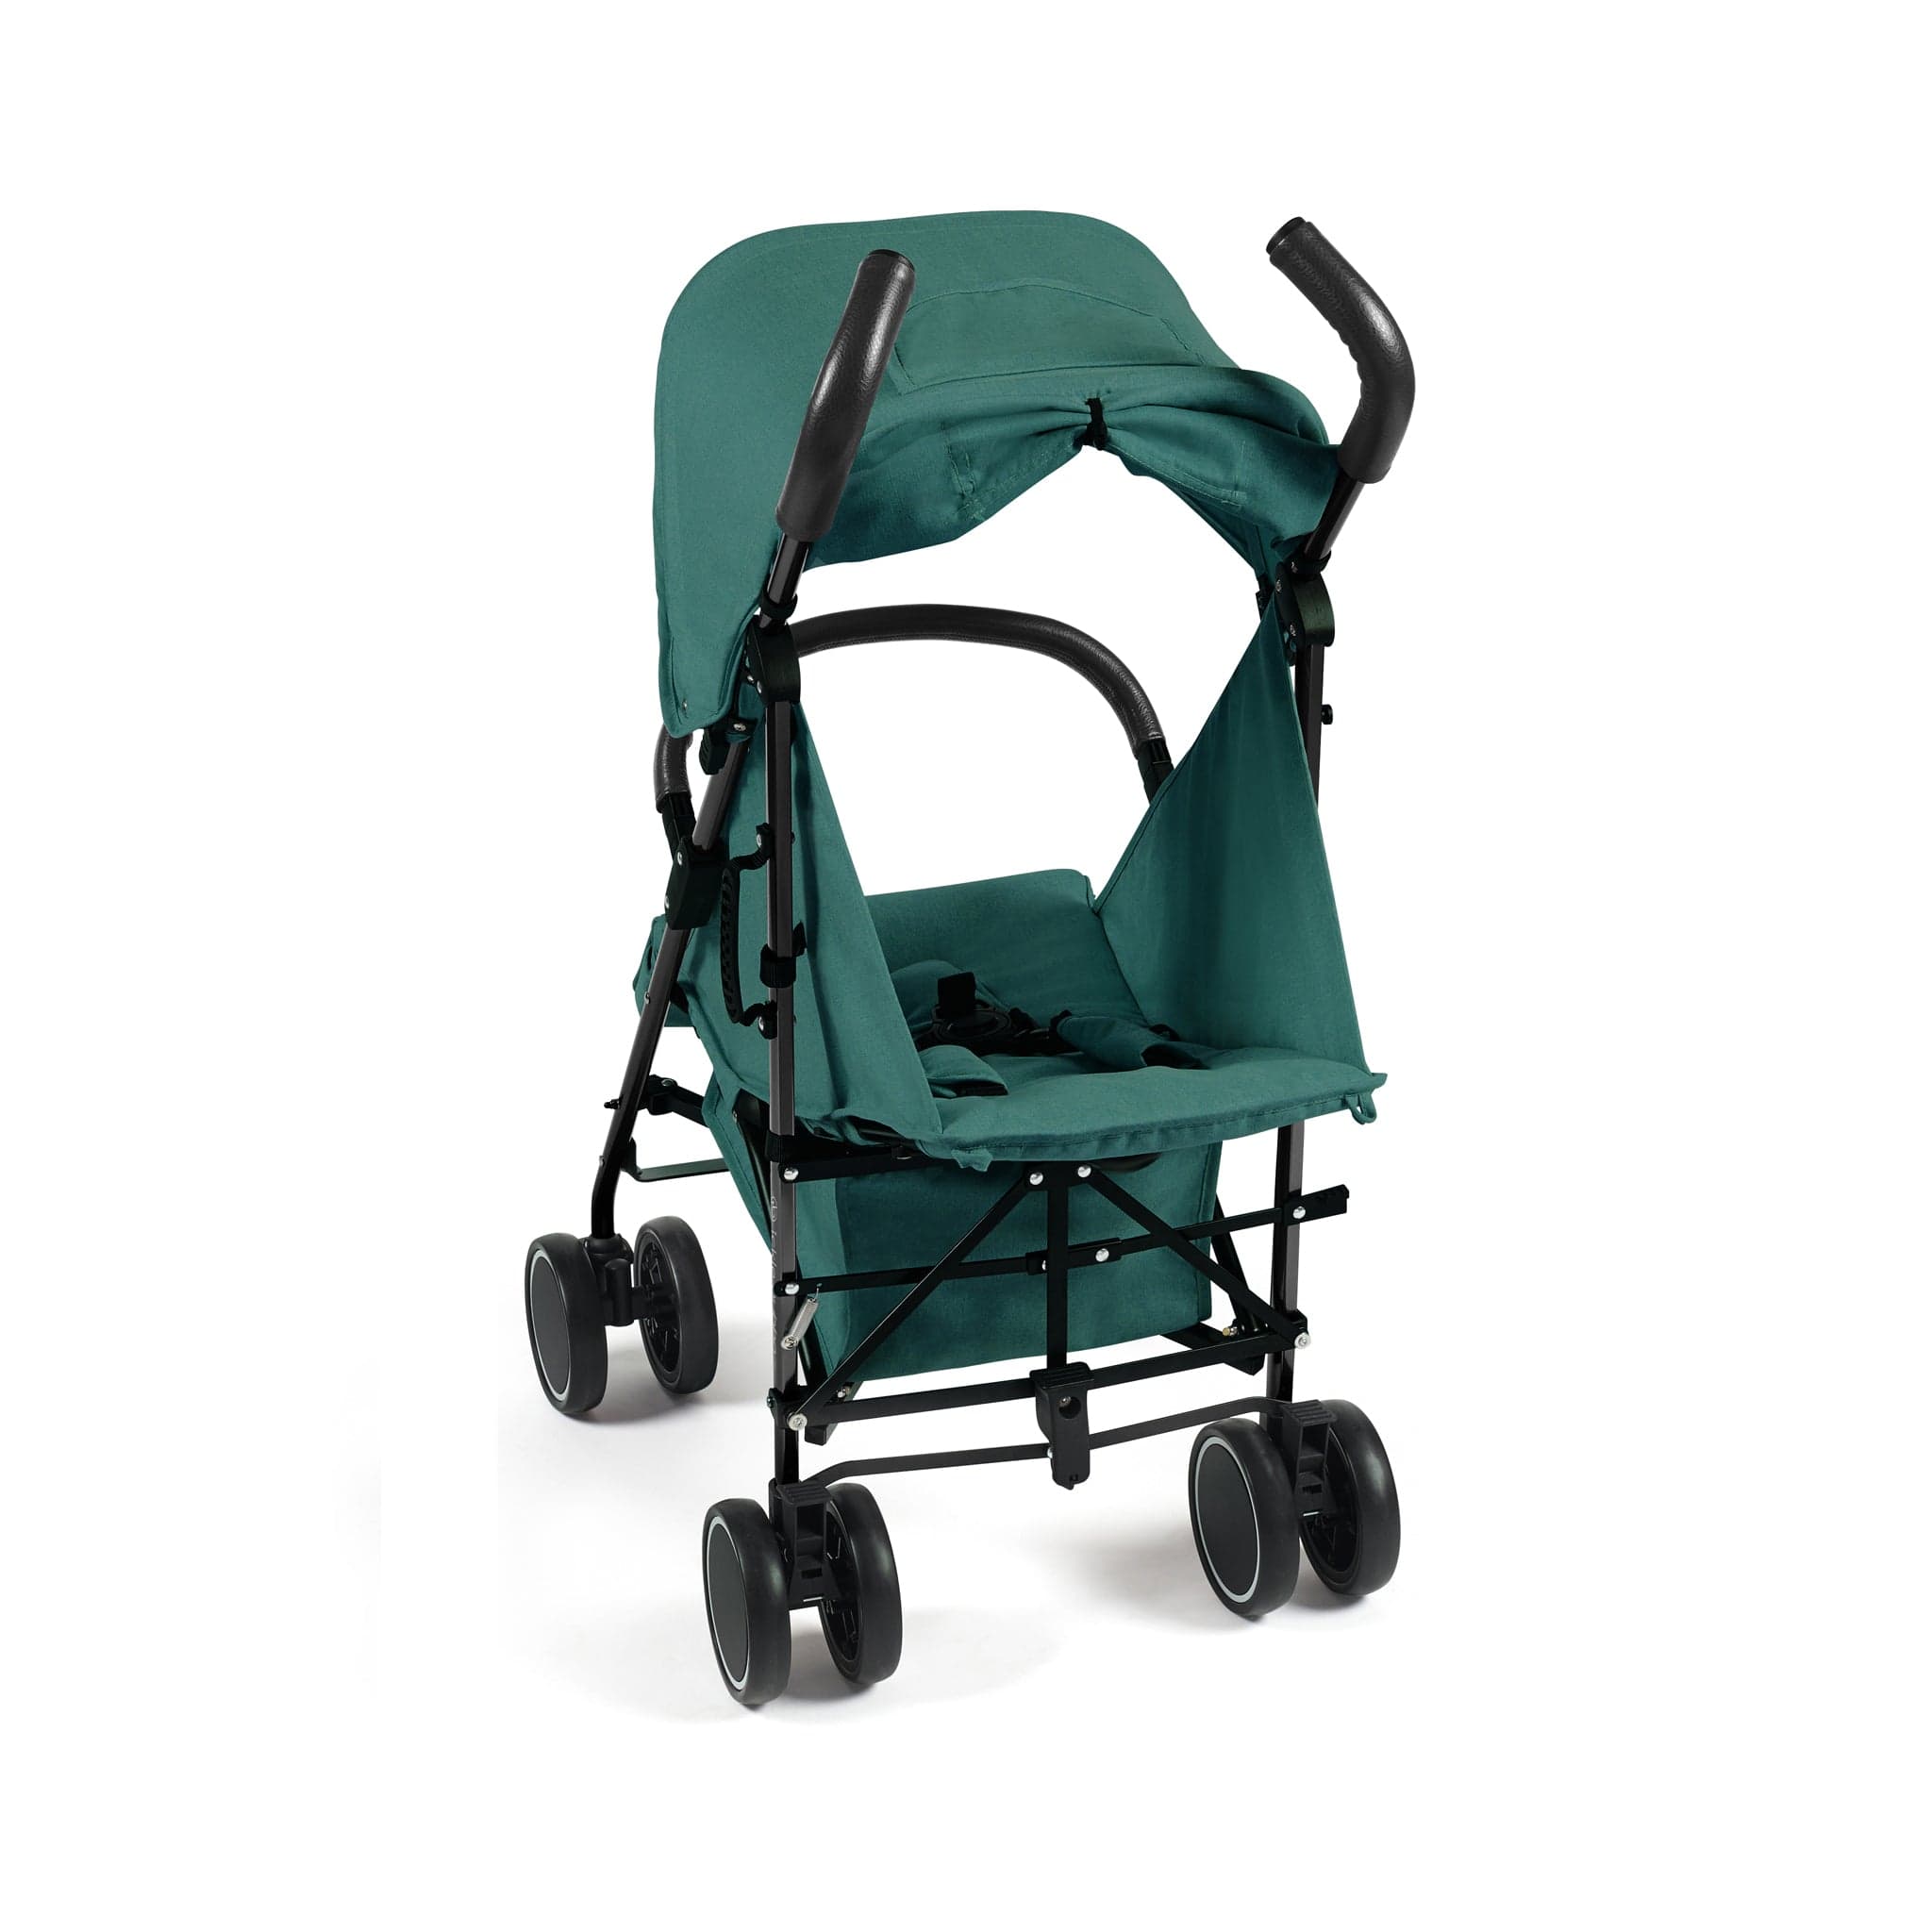 Ickle Bubba baby pushchairs Ickle Bubba Discovery Max Pushchair Teal/Matt Black 15-002-200-119